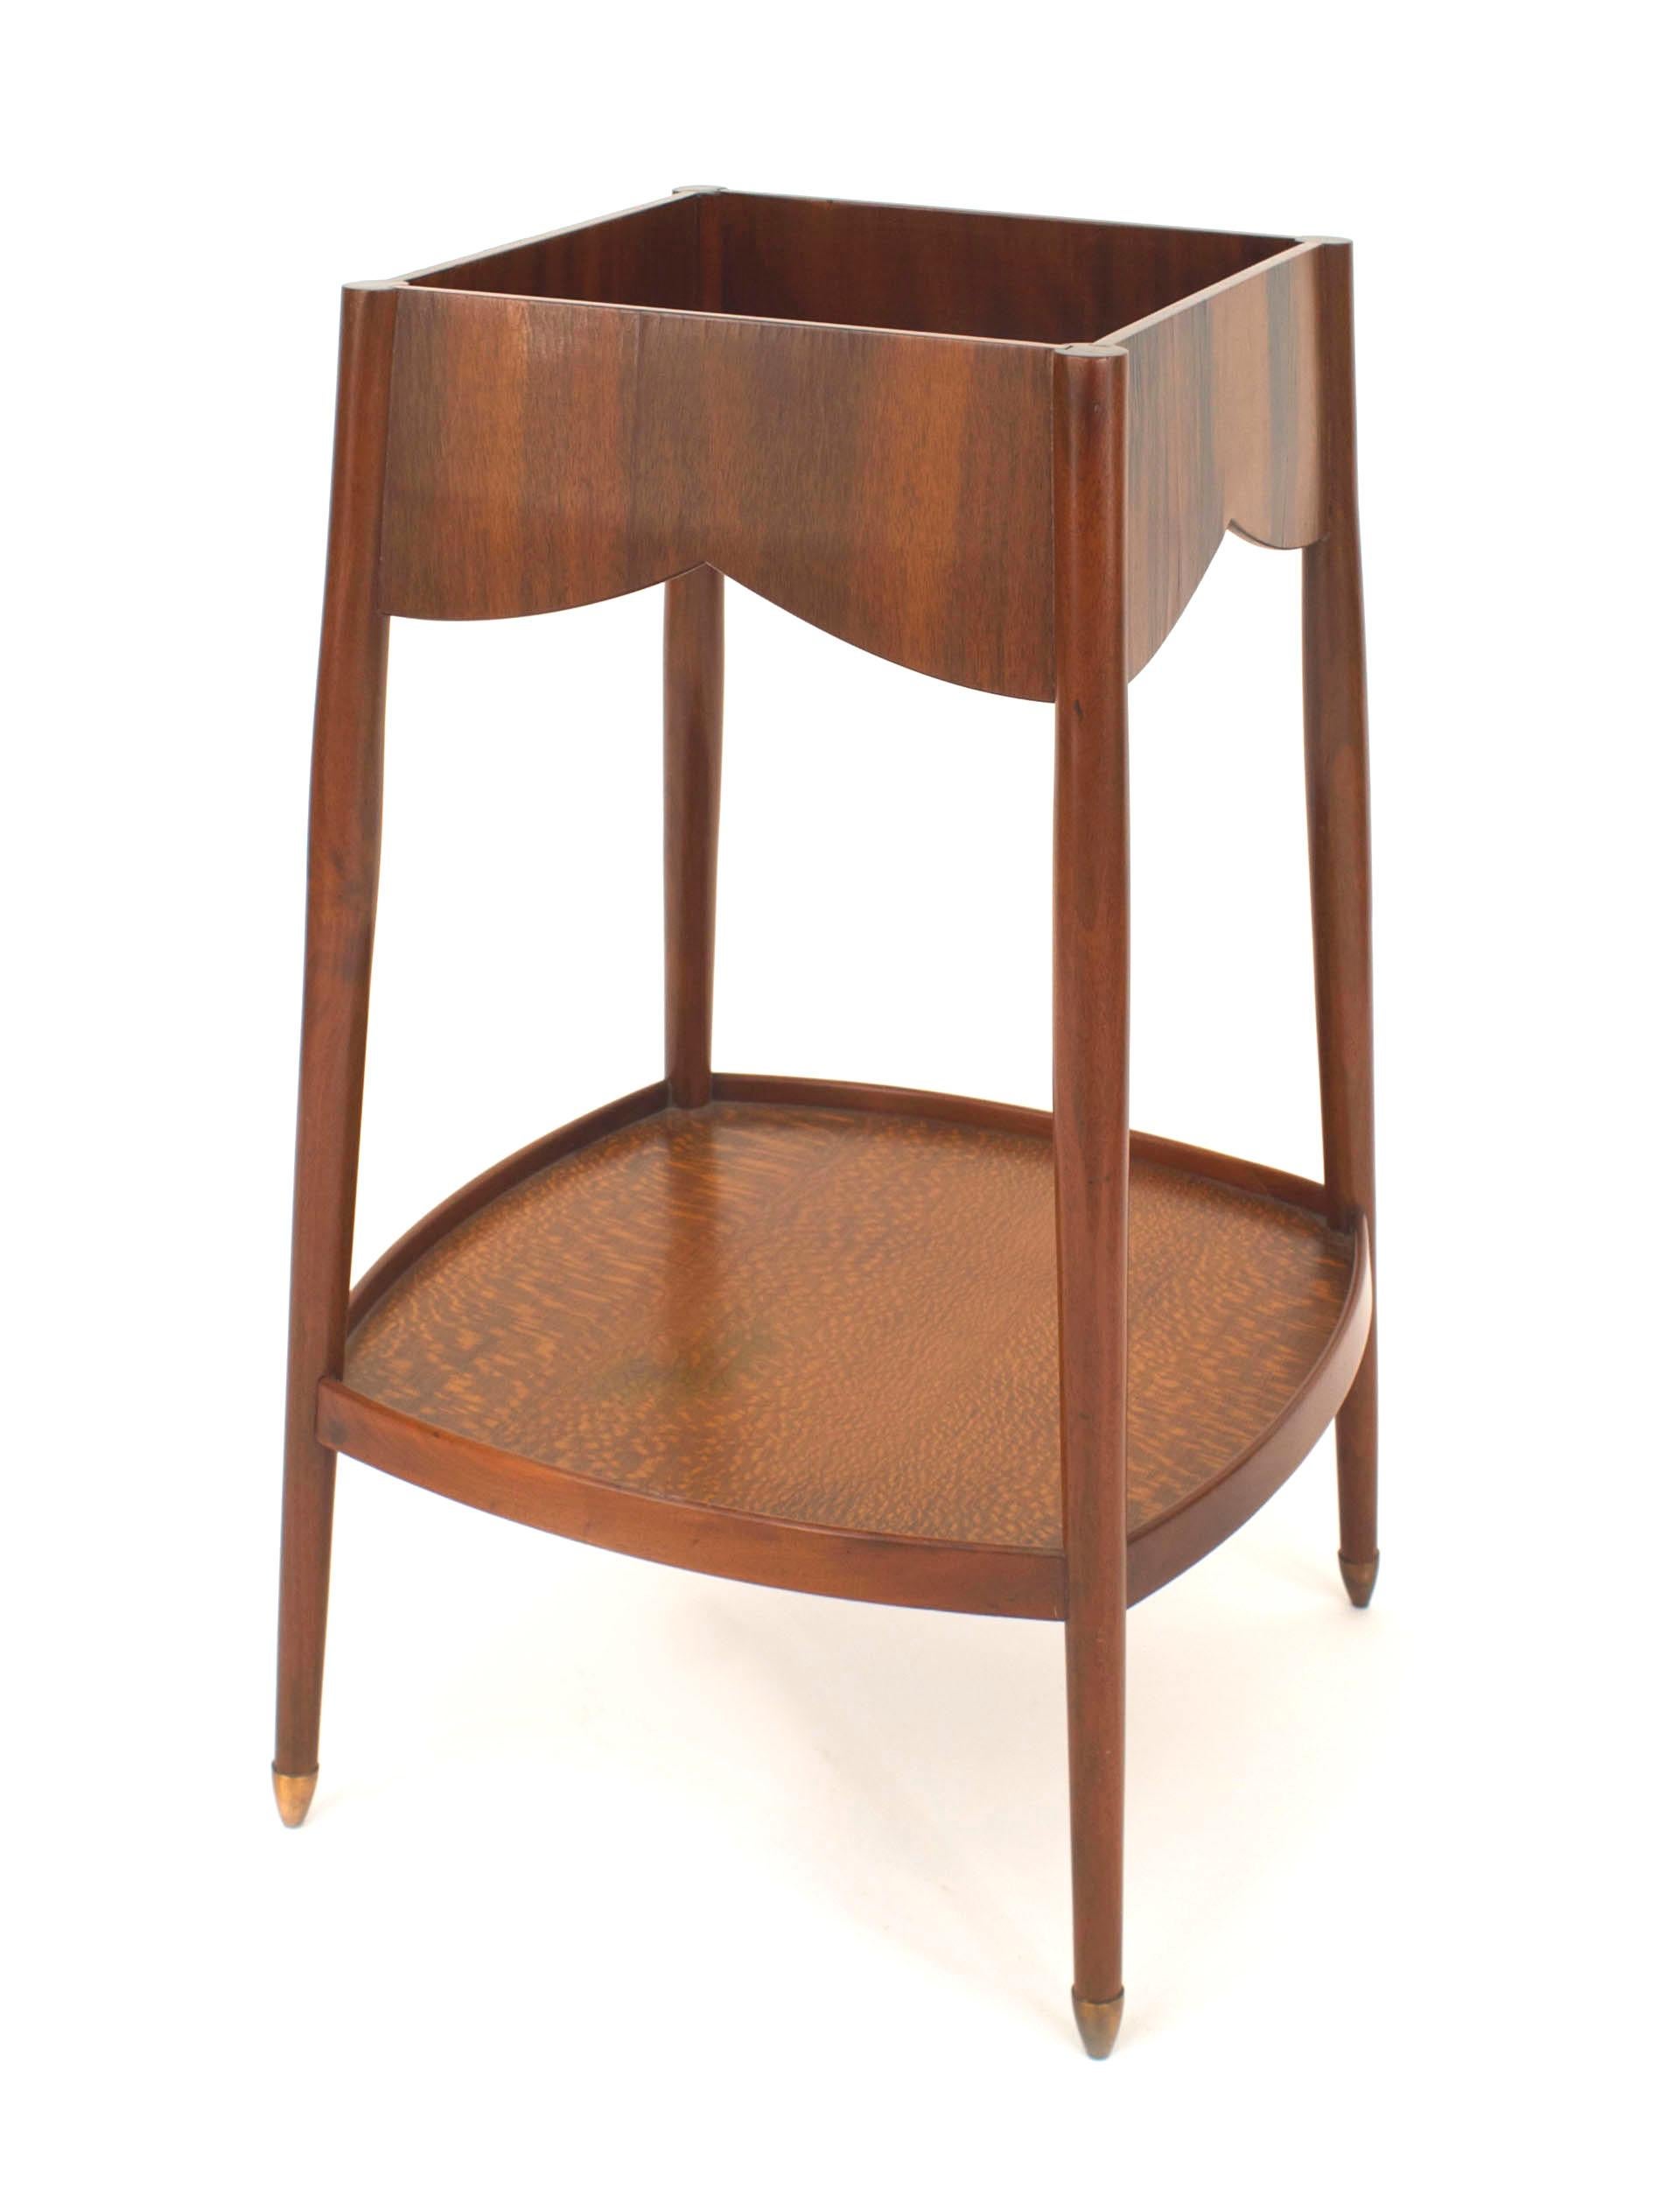 Louis Majorelle French Art Nouveau Curved Walnut End Table In Good Condition For Sale In New York, NY